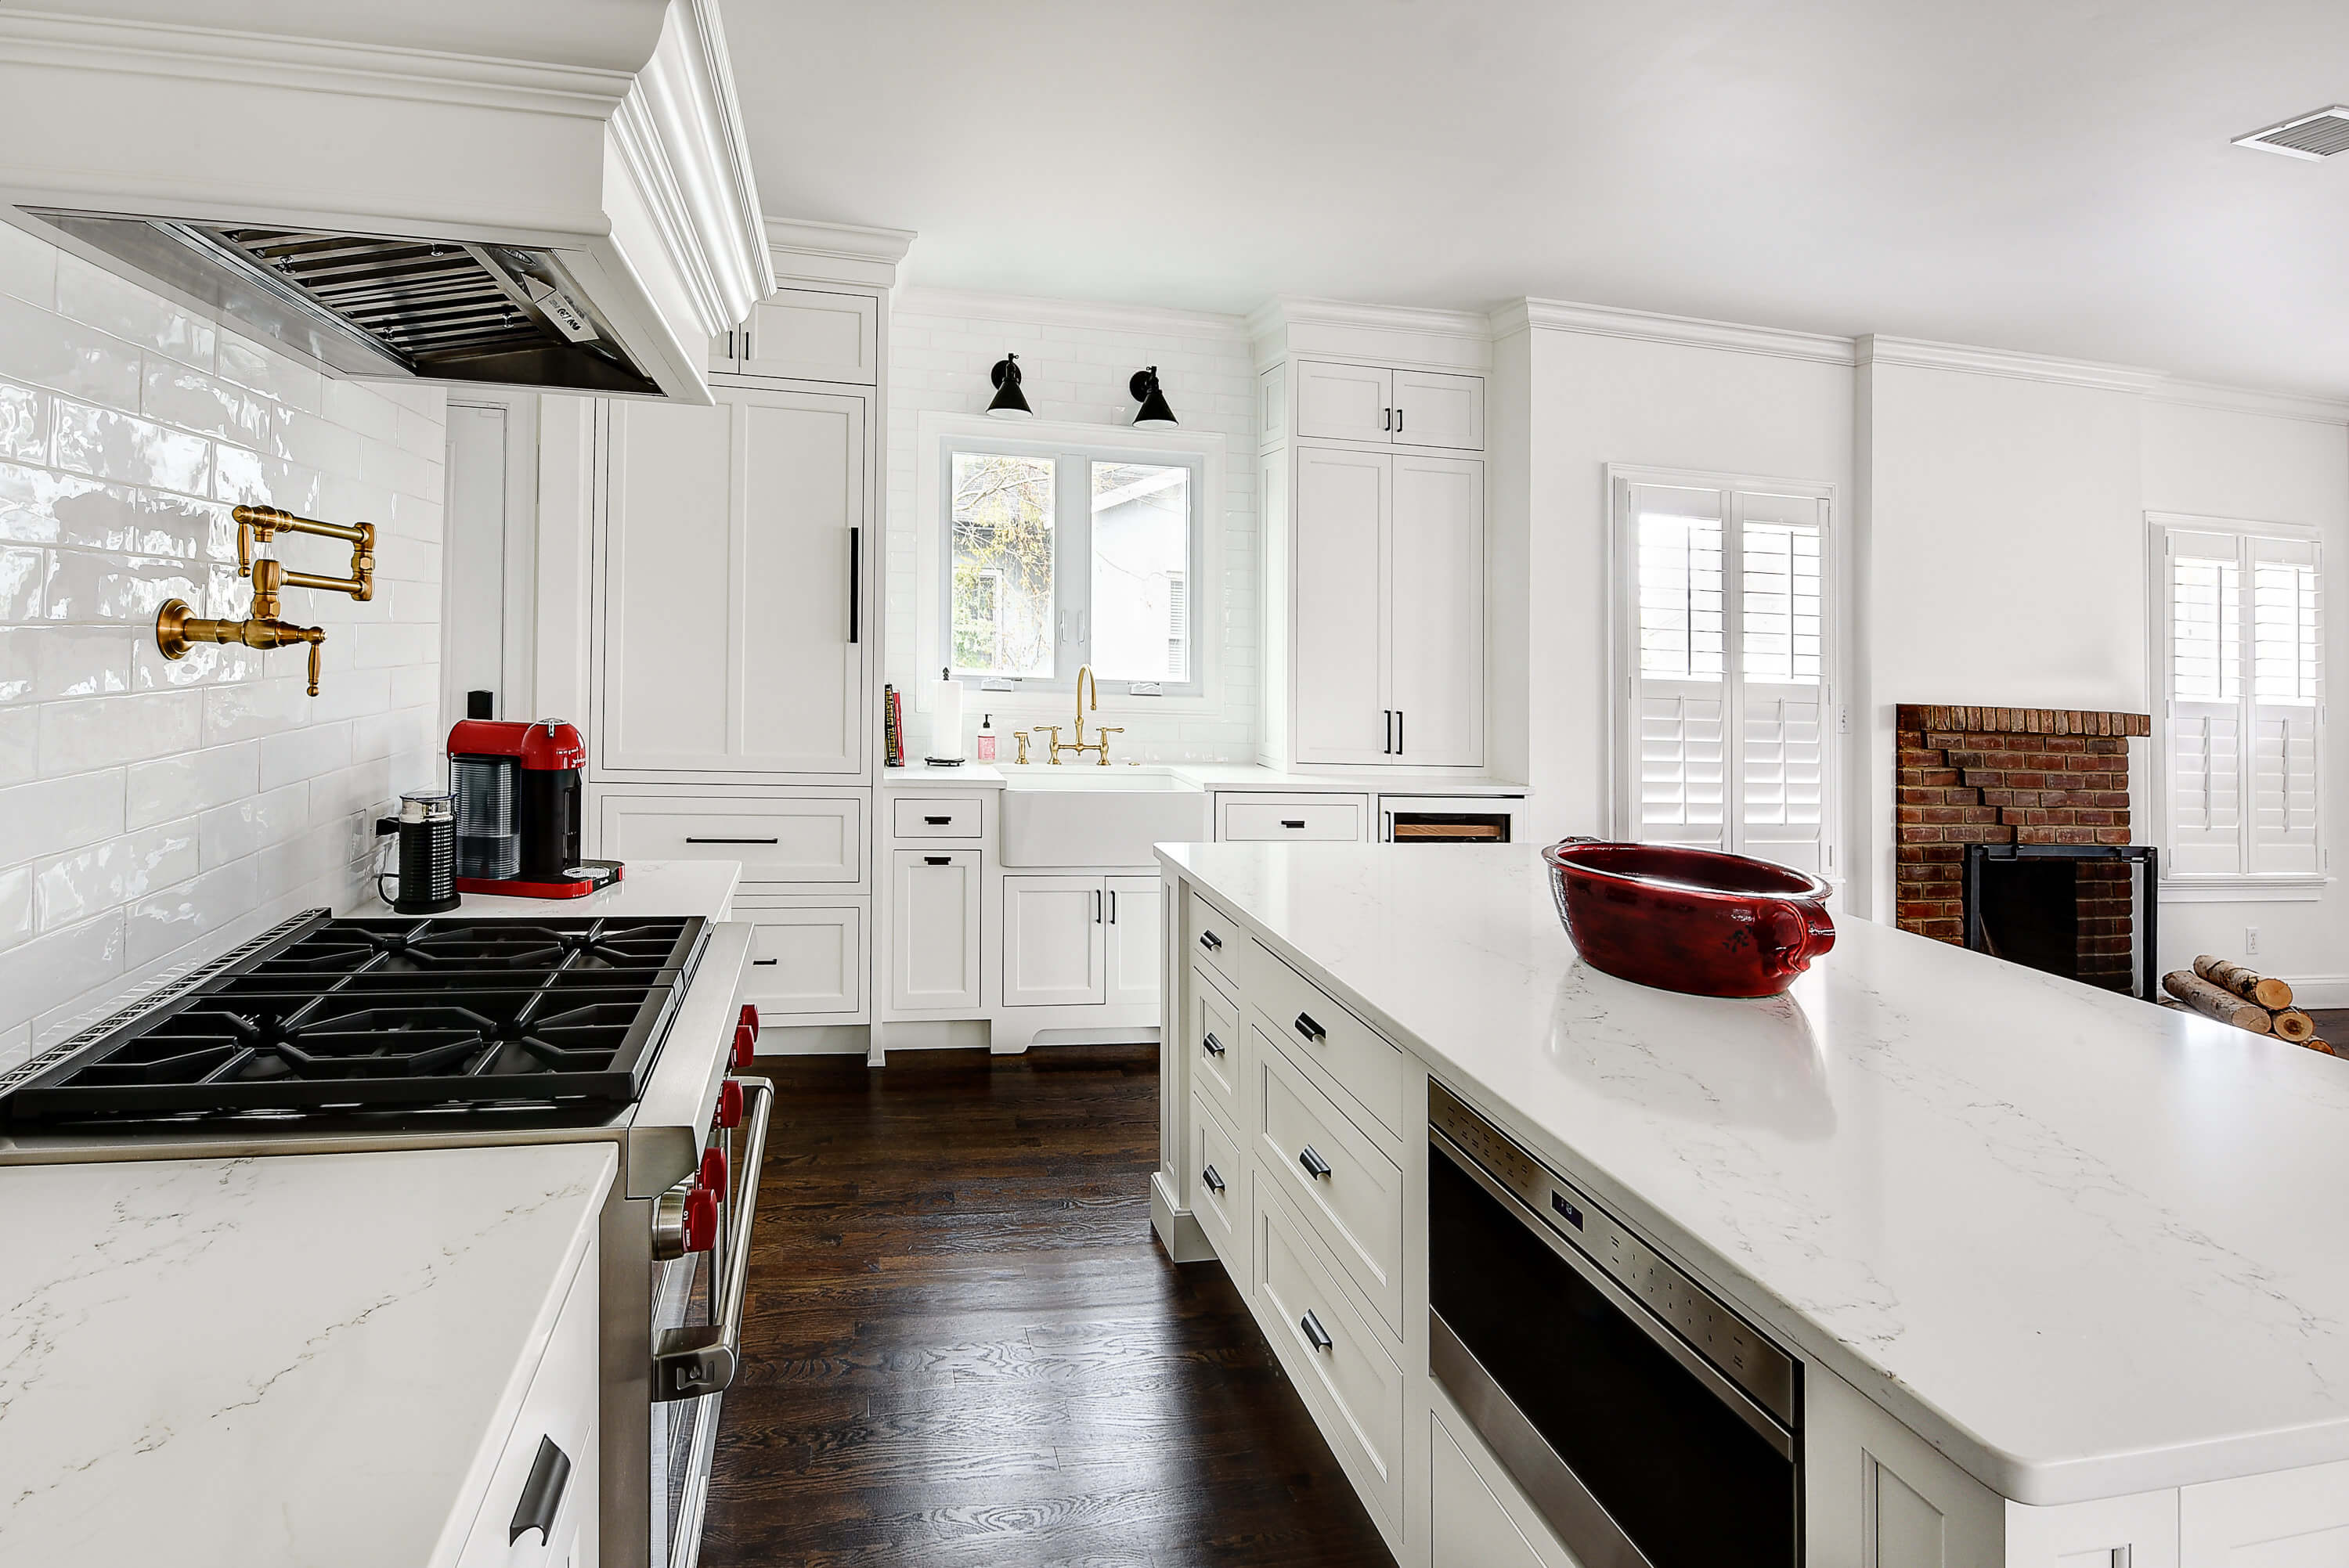 A bright white kitchen remodel with a large space for the kitchen sink and cooking area.